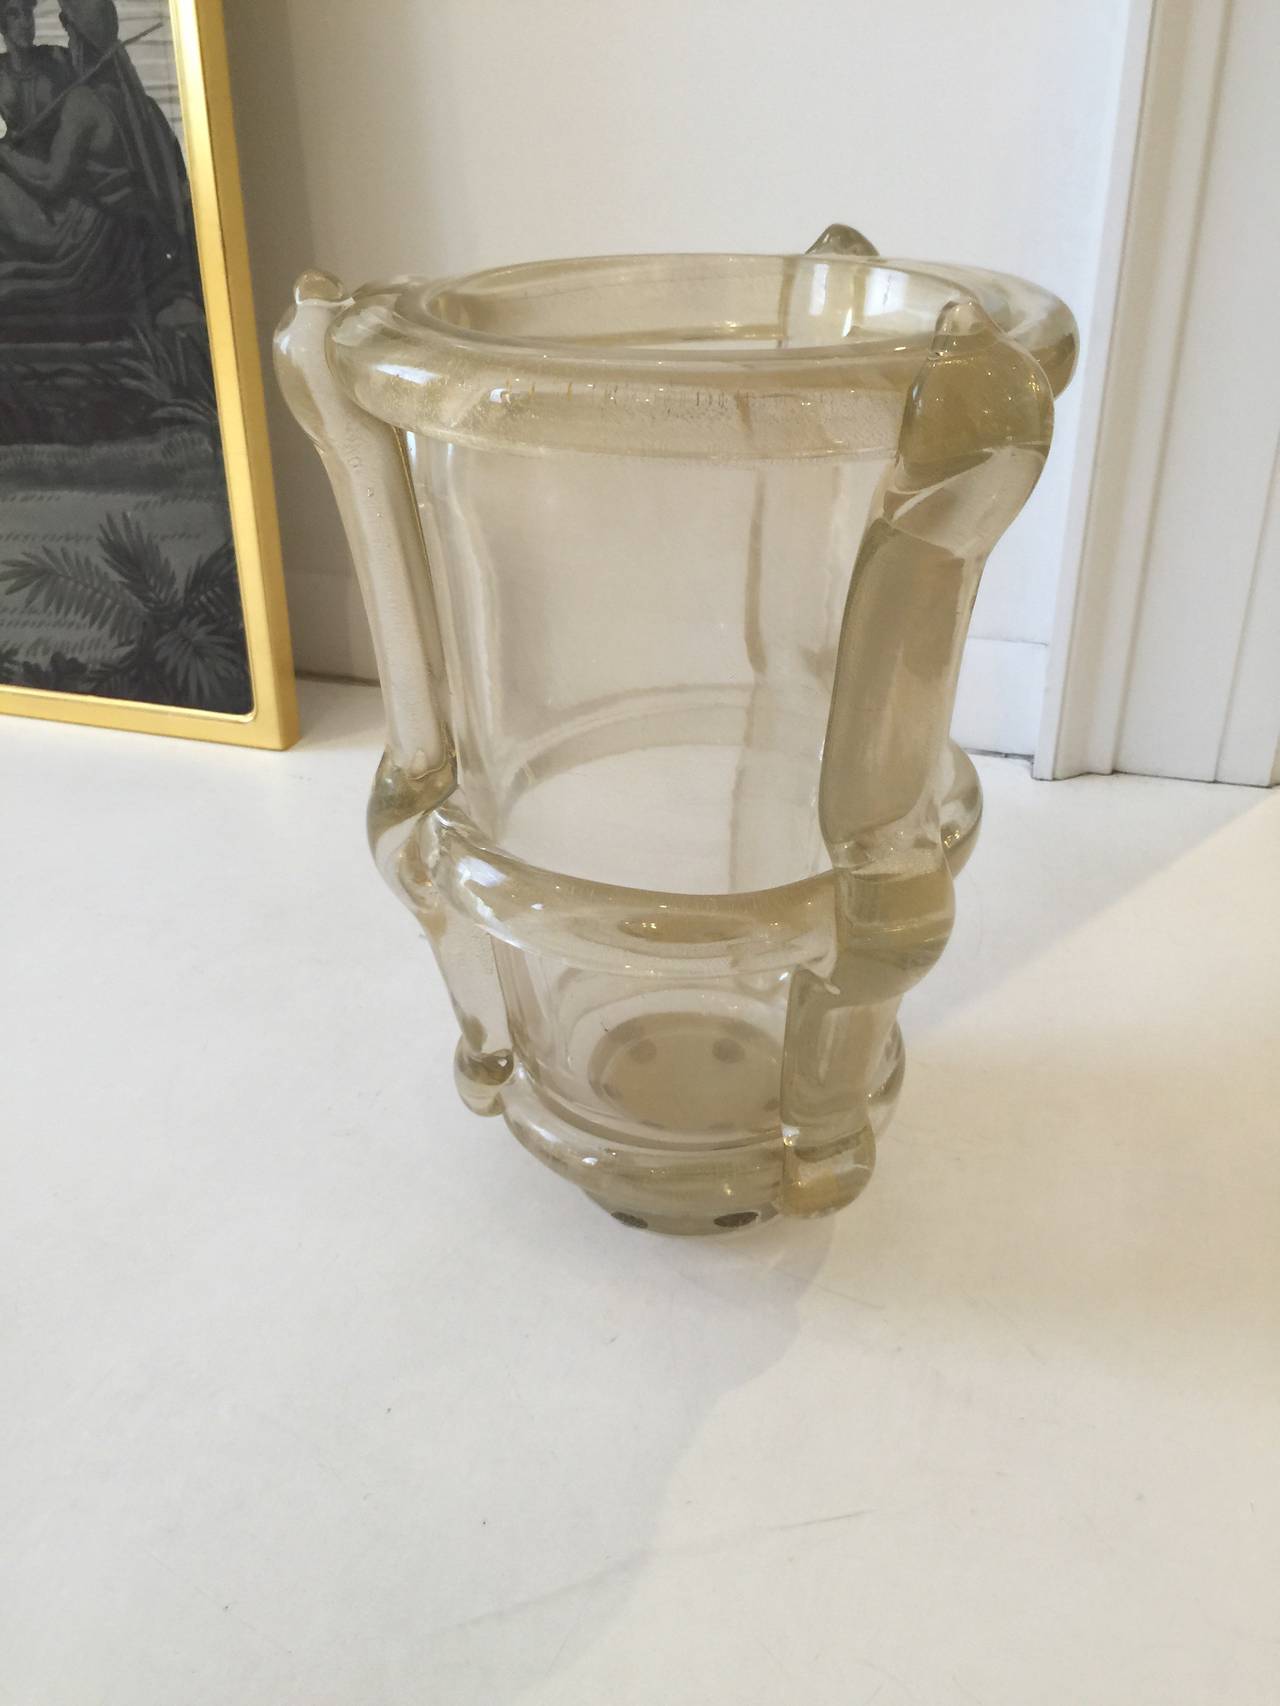 This signed vase is hand blown with gold flake and glass.